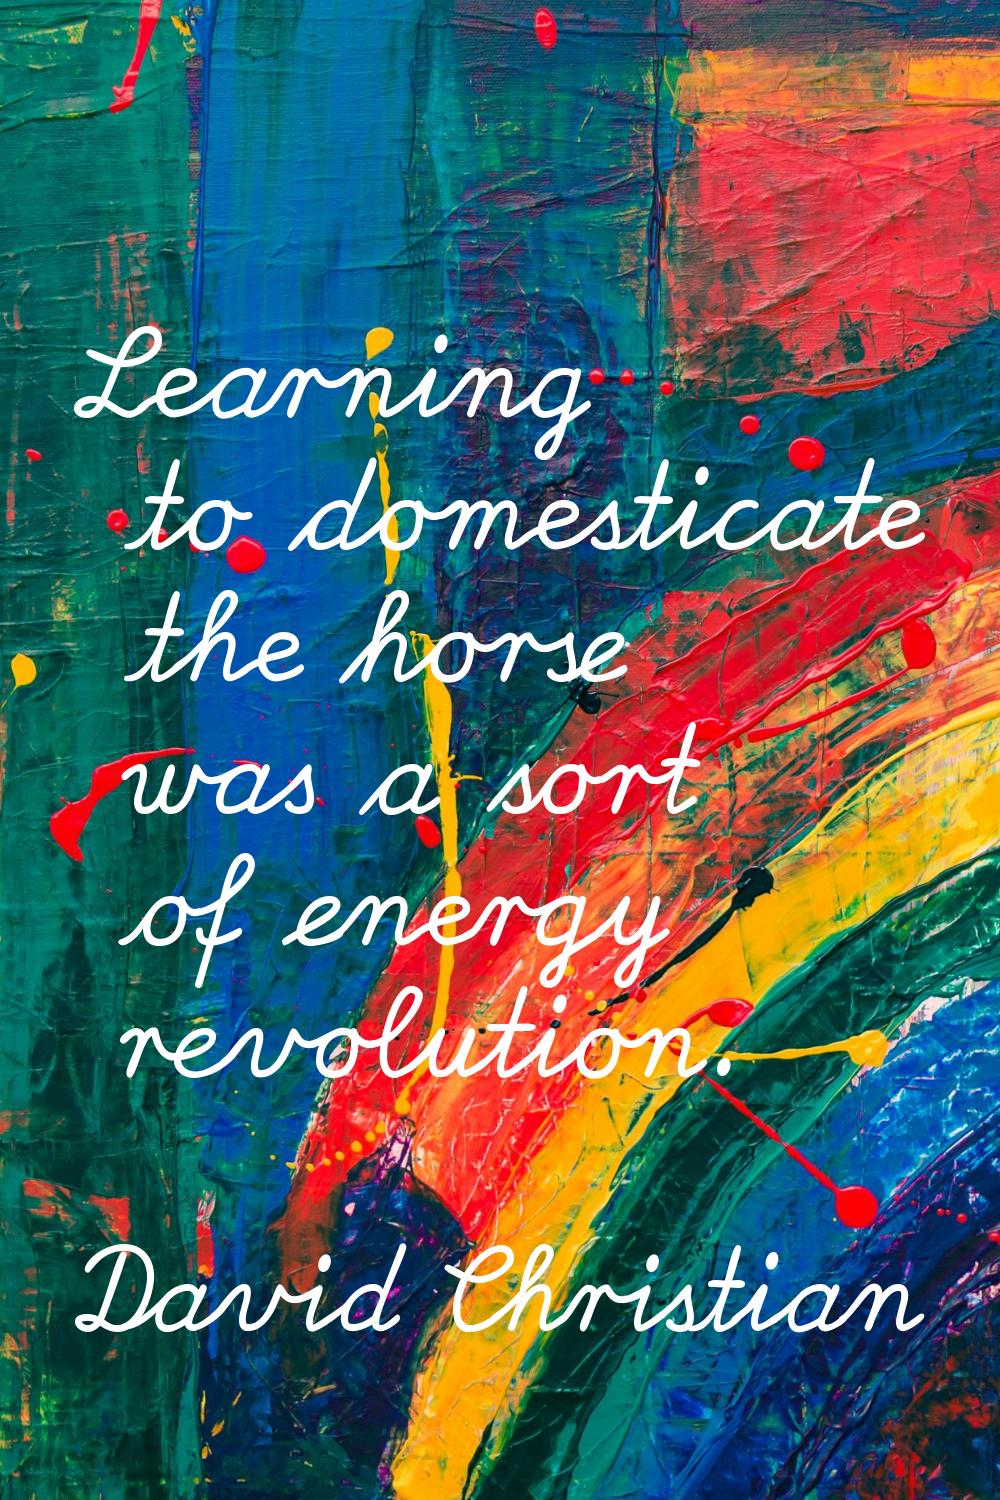 Learning to domesticate the horse was a sort of energy revolution.